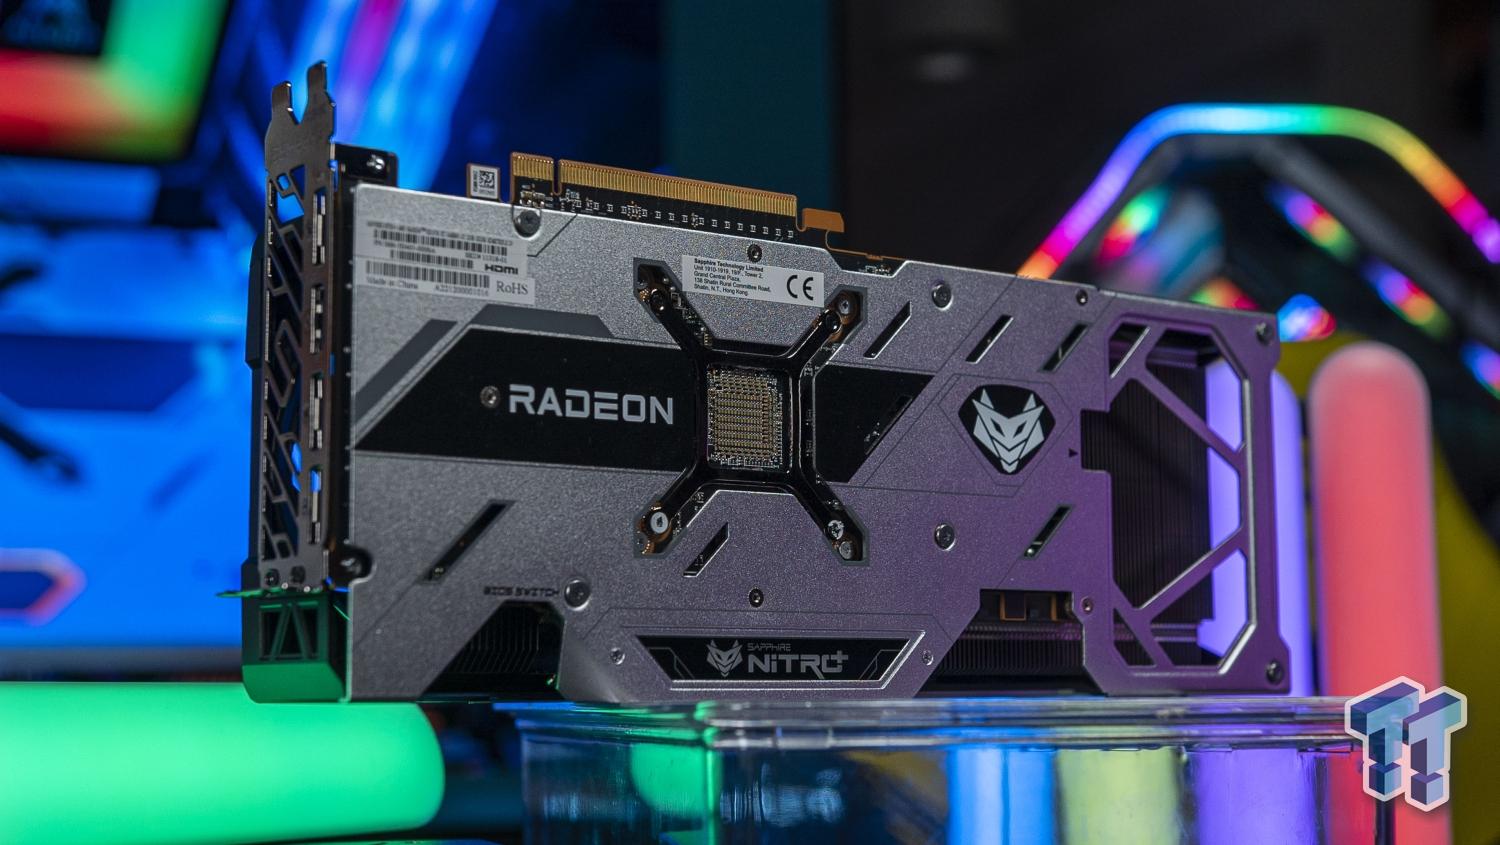 AMD Radeon RX 6700 XT 12 GB & Radeon RX 6700 6 GB Custom Graphics Cards  From PowerColor Spotted